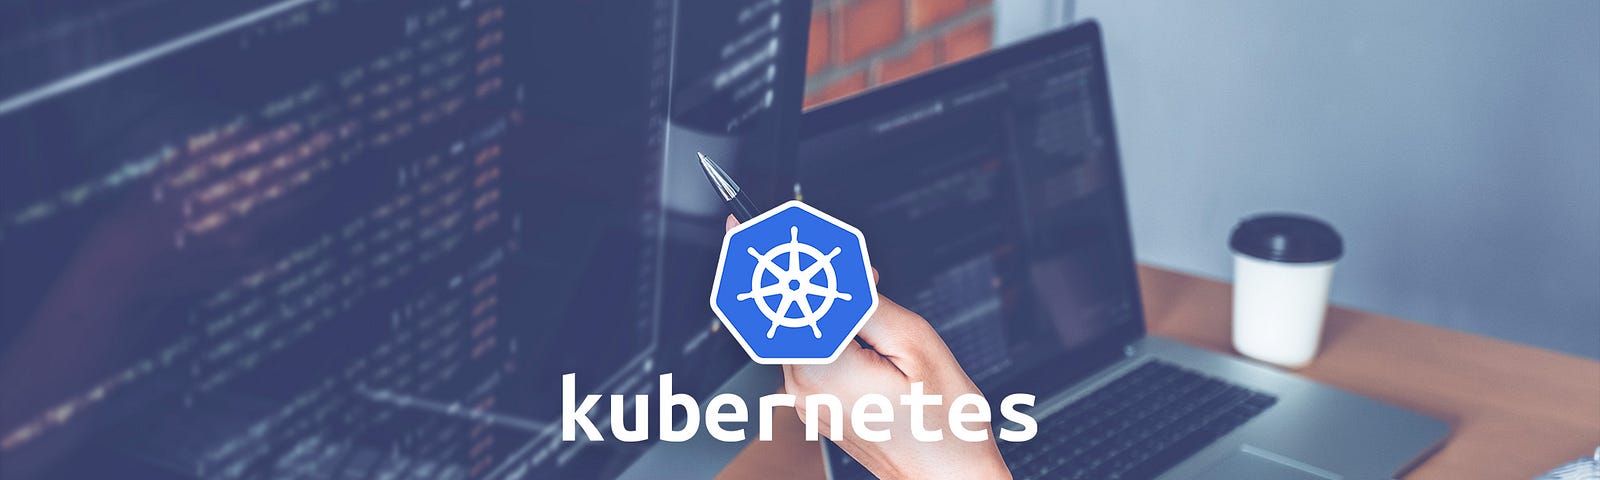 What is Kubernetes and why do you need it?